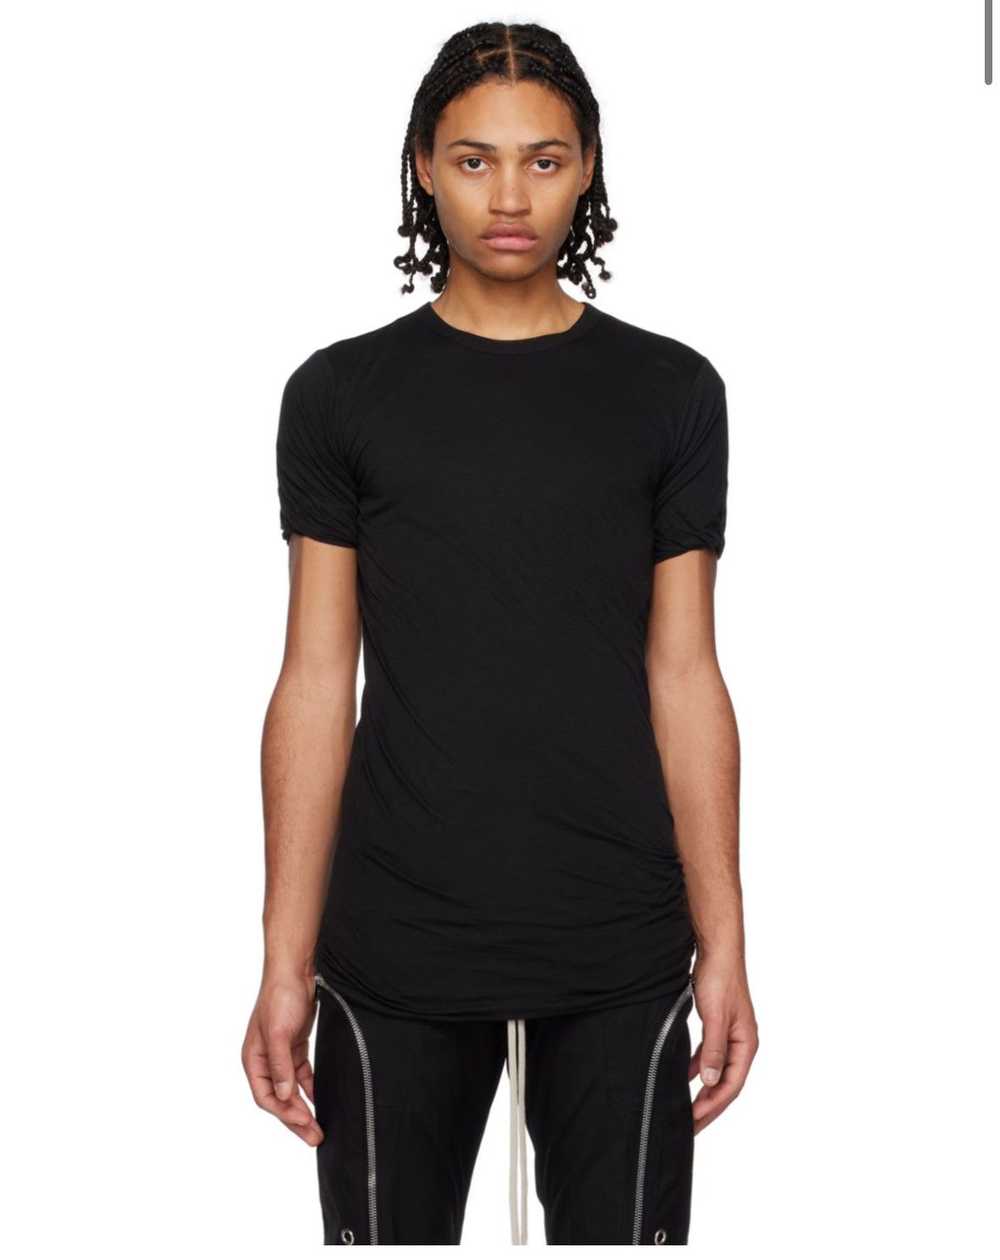 Rick Owens Rick Owens double sided T-shirt - image 1